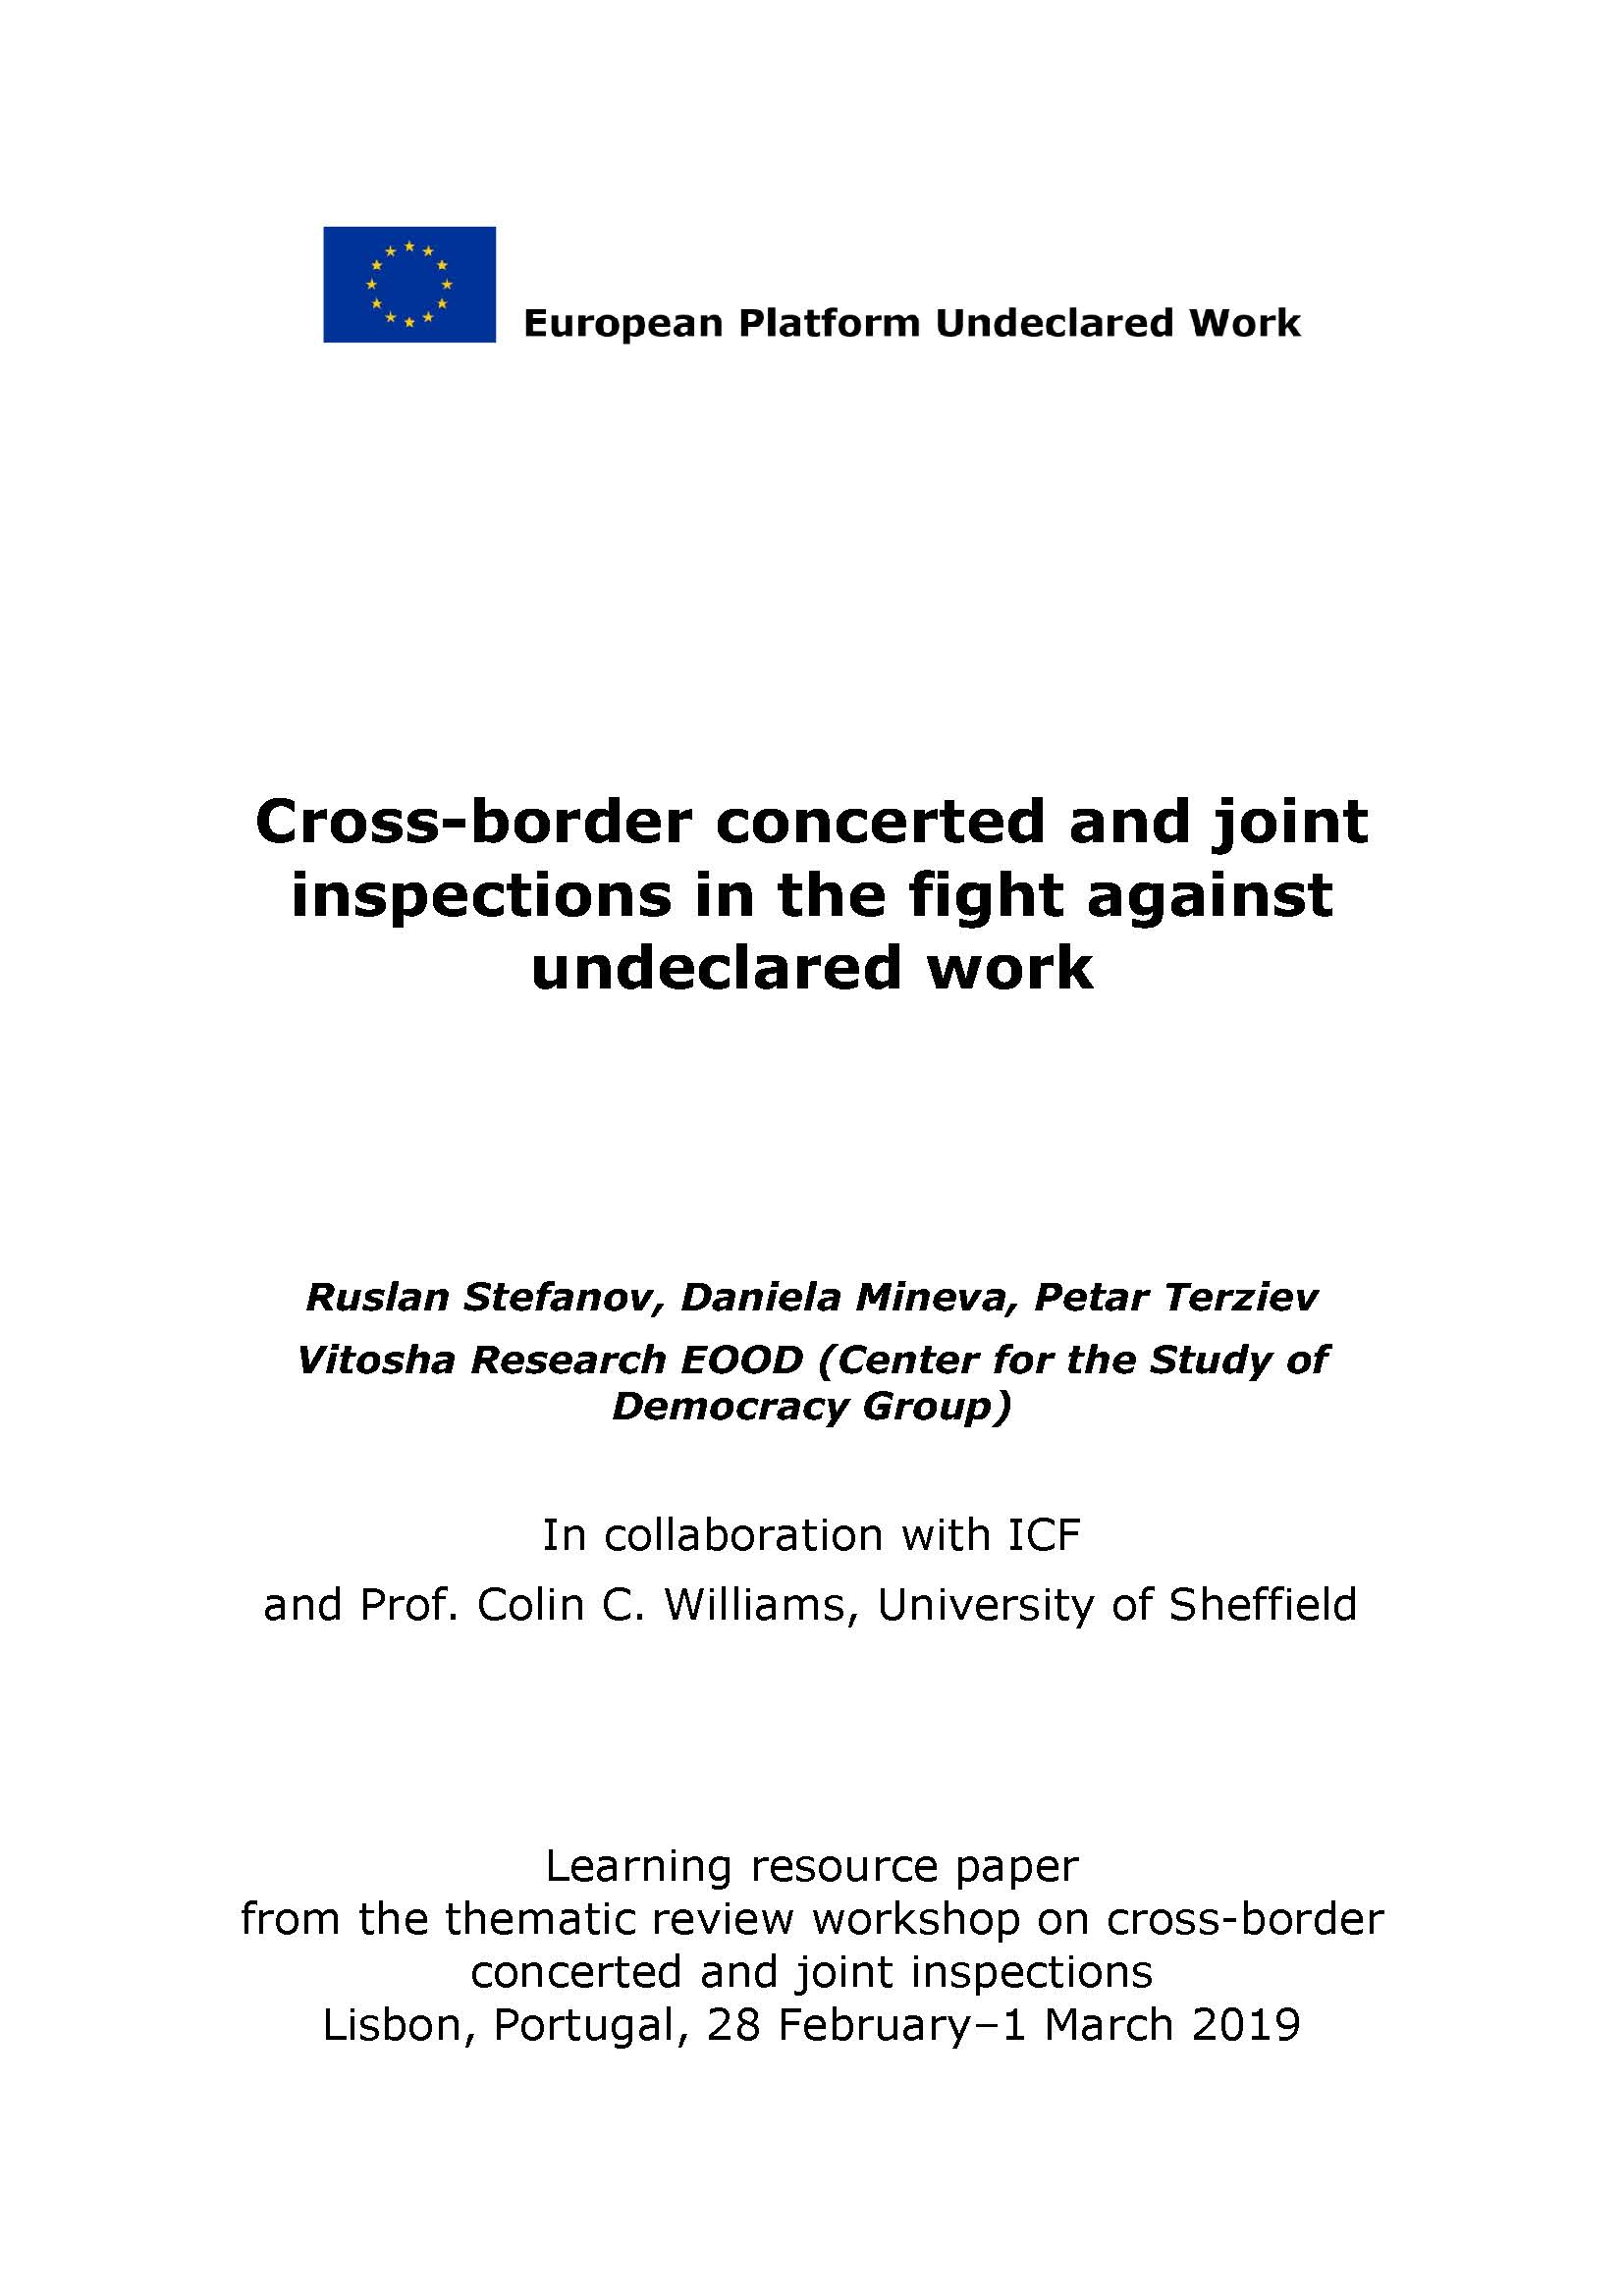 Cross-border concerted and joint inspections in the fight against undeclared work Cover Image